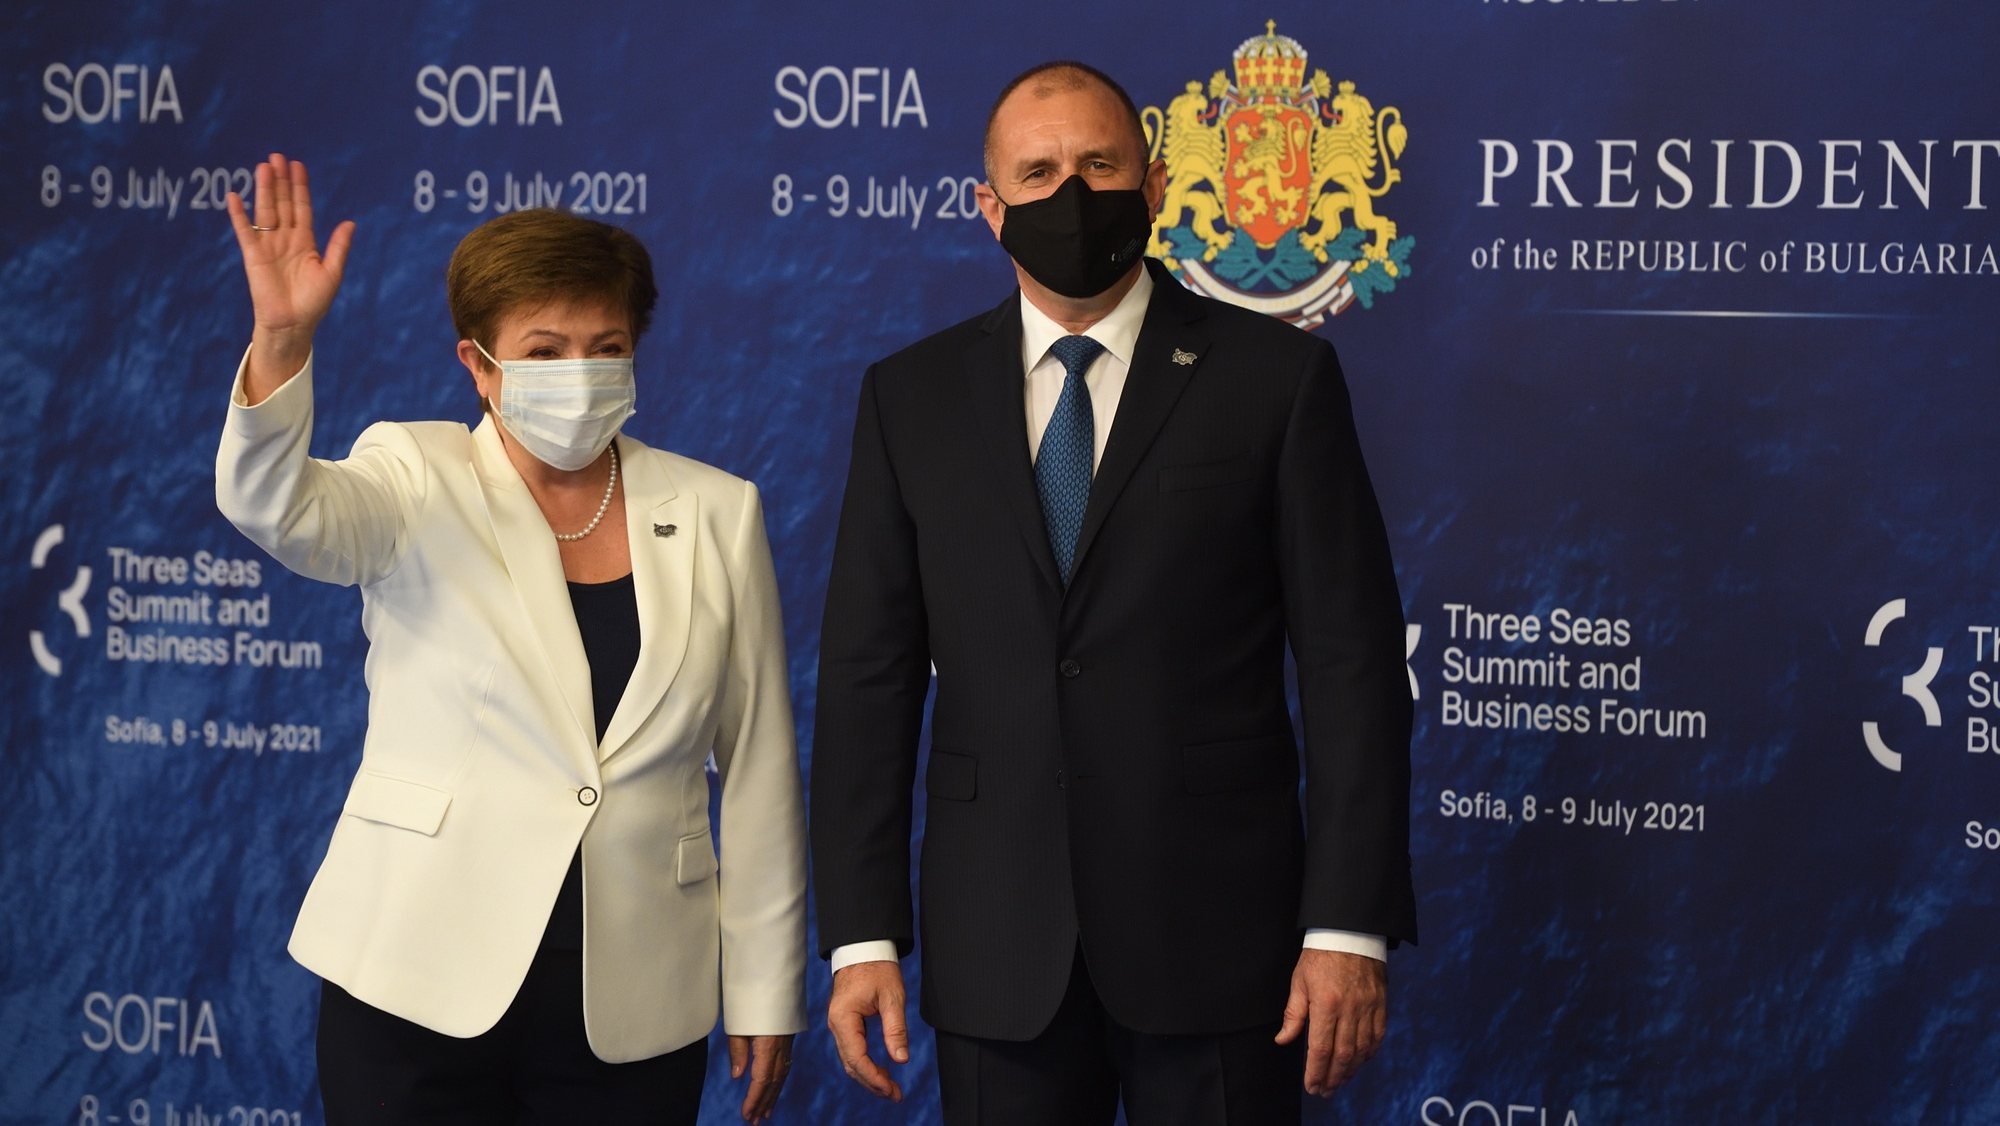 epa09331311 Bulgarian President Rumen Radev (R) welcomes Managing Director of the International Monetary Fund (IMF), Kristalina Georgieva (L) during the opening of the sixth Summit of the Three Seas and Business Forum in Sofia, Bulgaria, 08 July 2021. The summit and business forum of the Three Seas Initiative will be held on 08 and 09 July 2021 at the National Palace of Culture in Sofia.  EPA/VASSIL DONEV